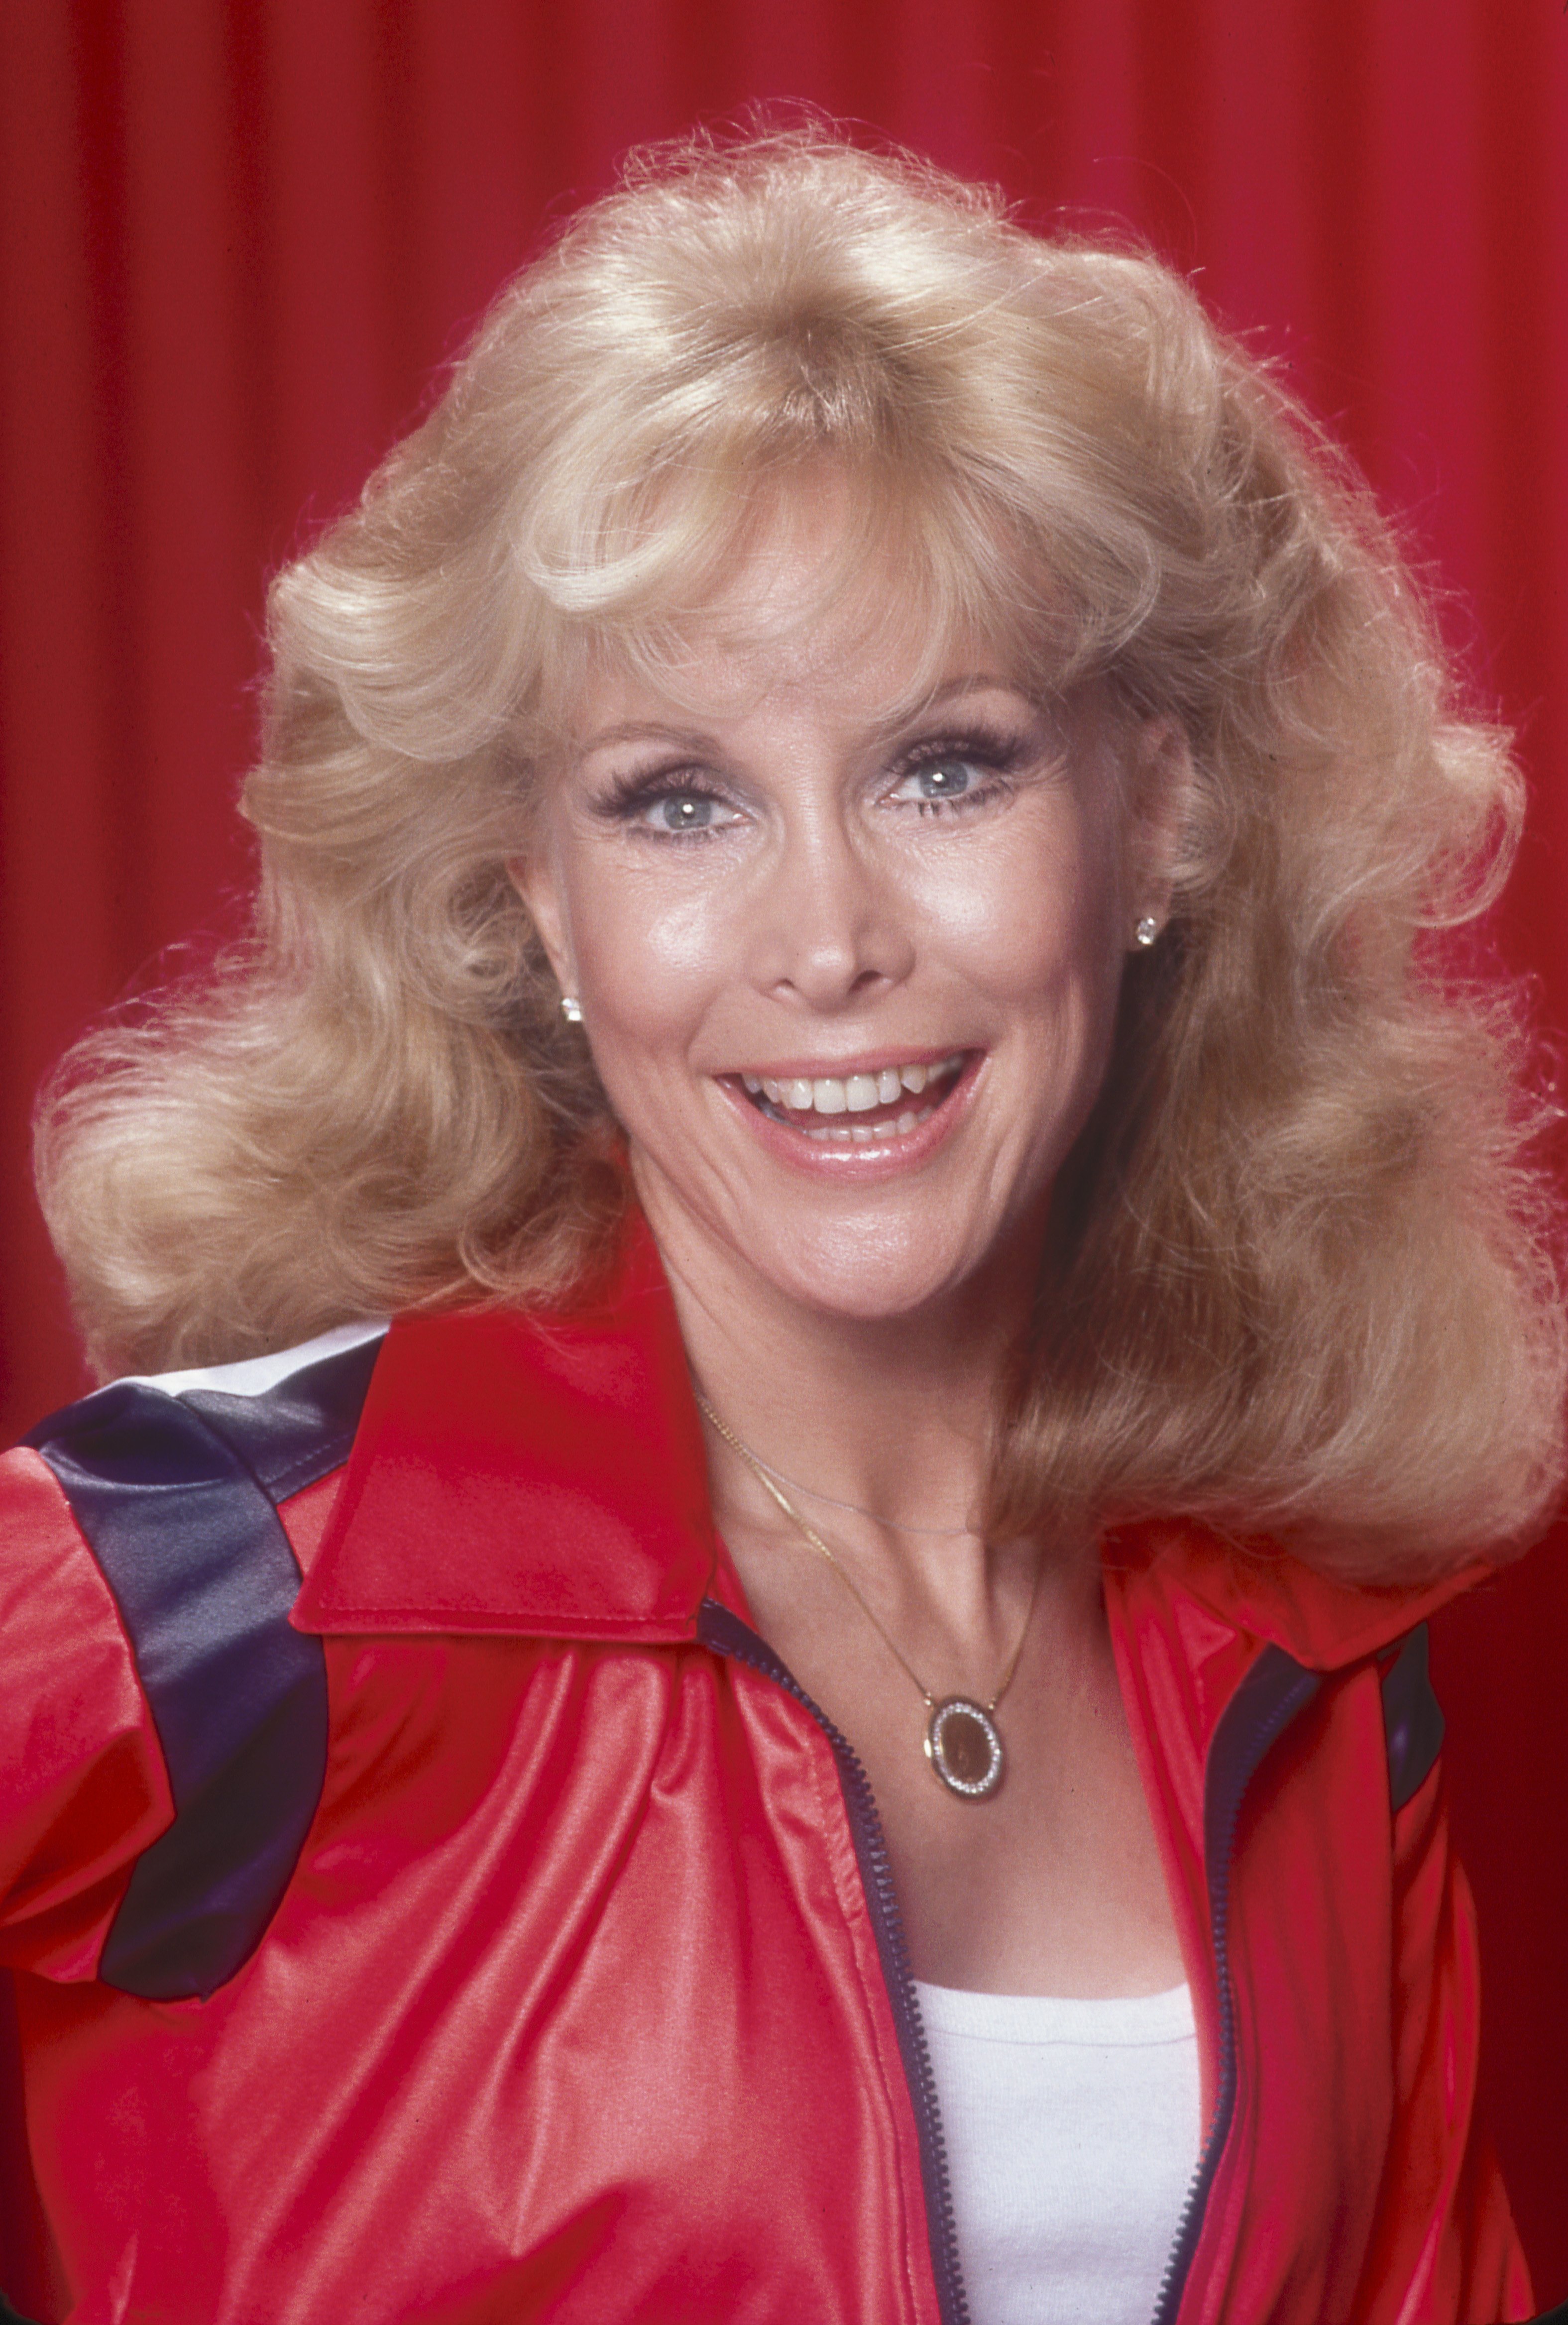 Barbara Eden poses in a red jacket and white top in 1990 in Los Angeles, California. | Source: Getty Images